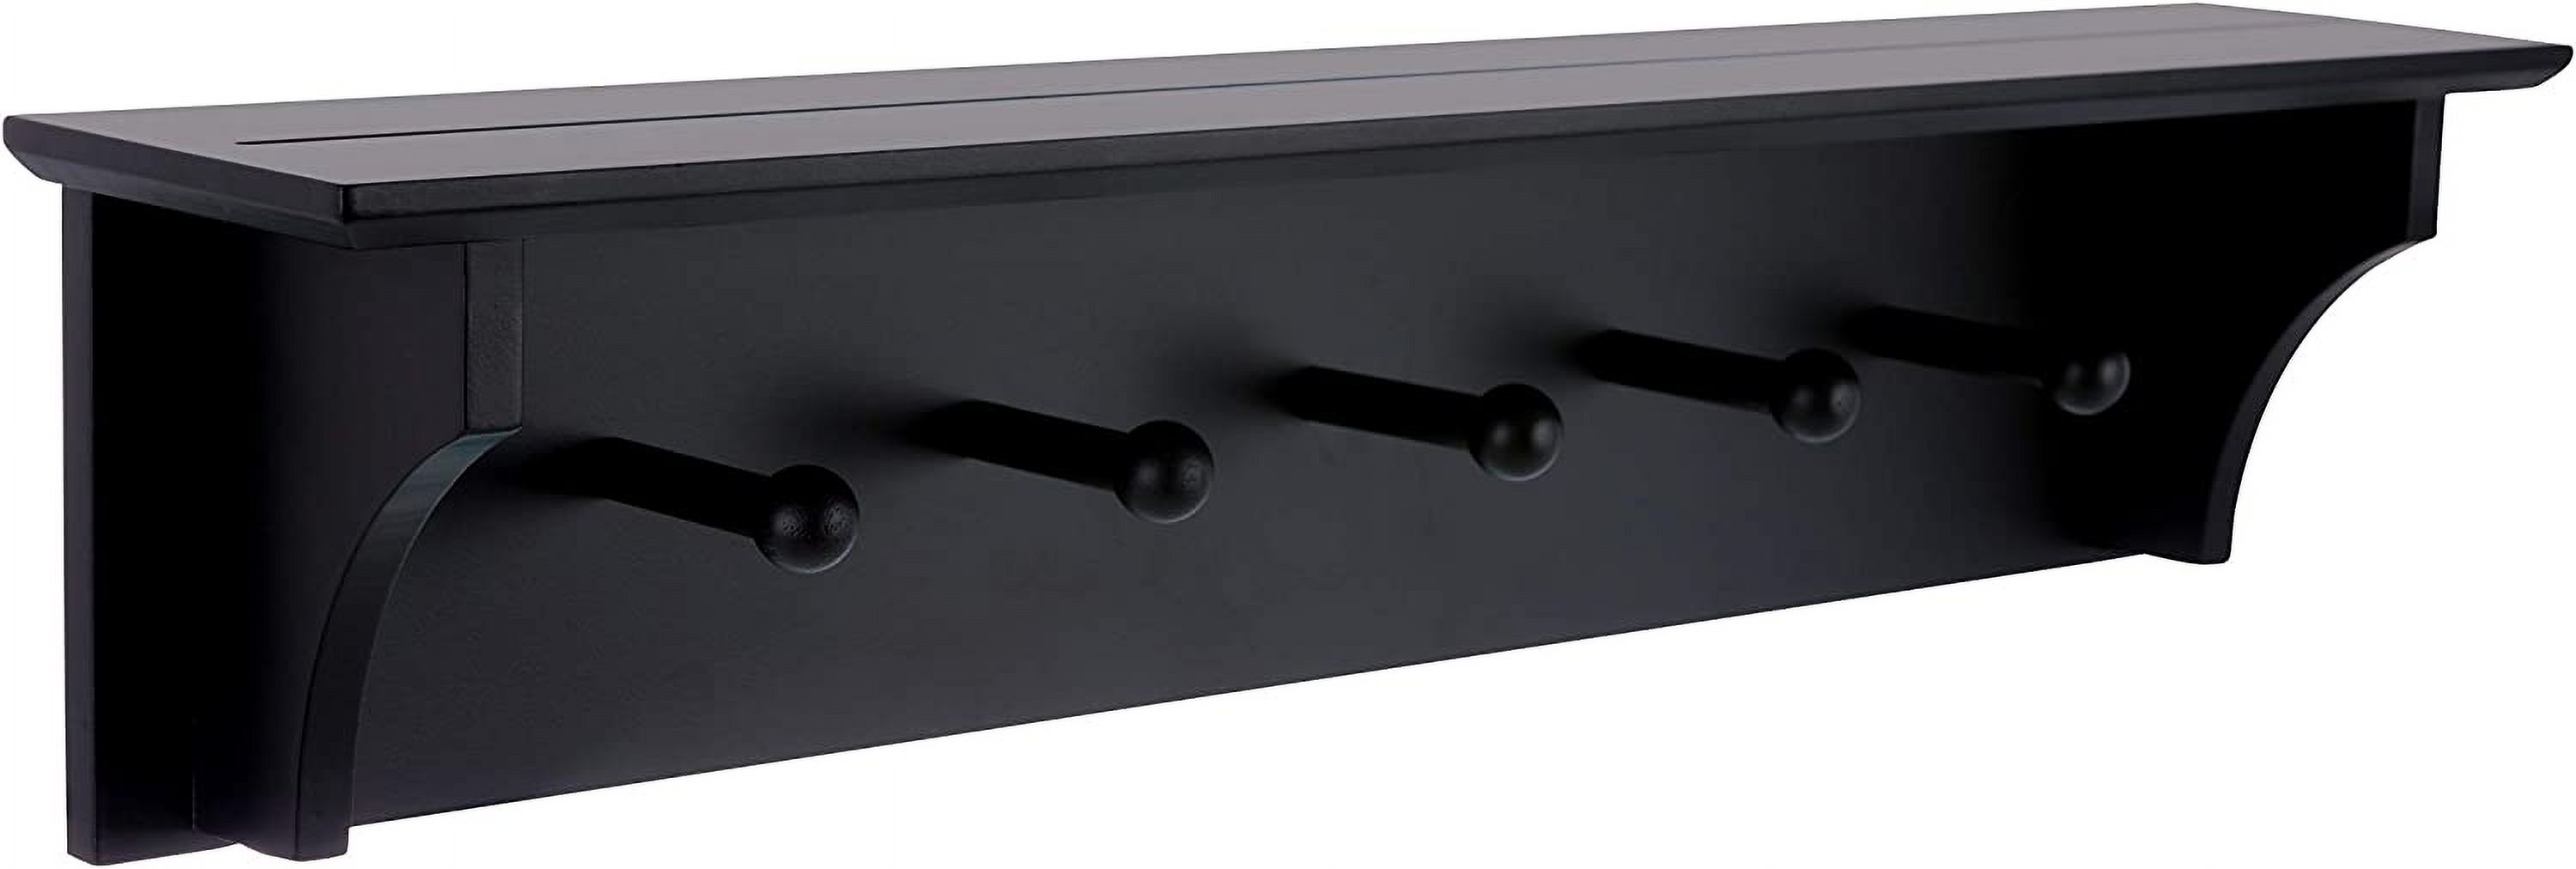 Generic Foster 24" Wall Shelf With 5 Pegs - image 4 of 7